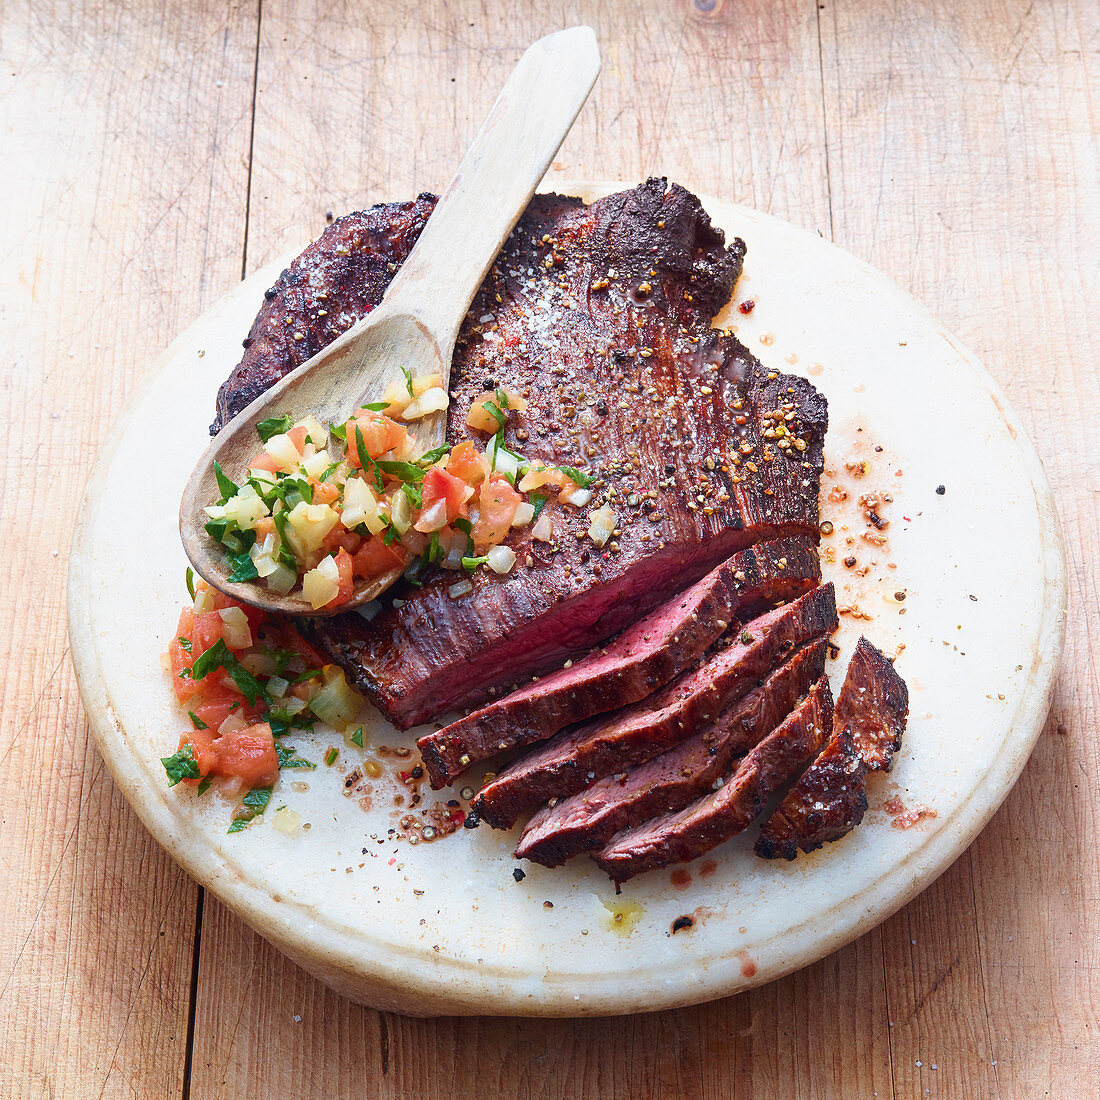 Grilled flank steak with parsley and tomato salsa